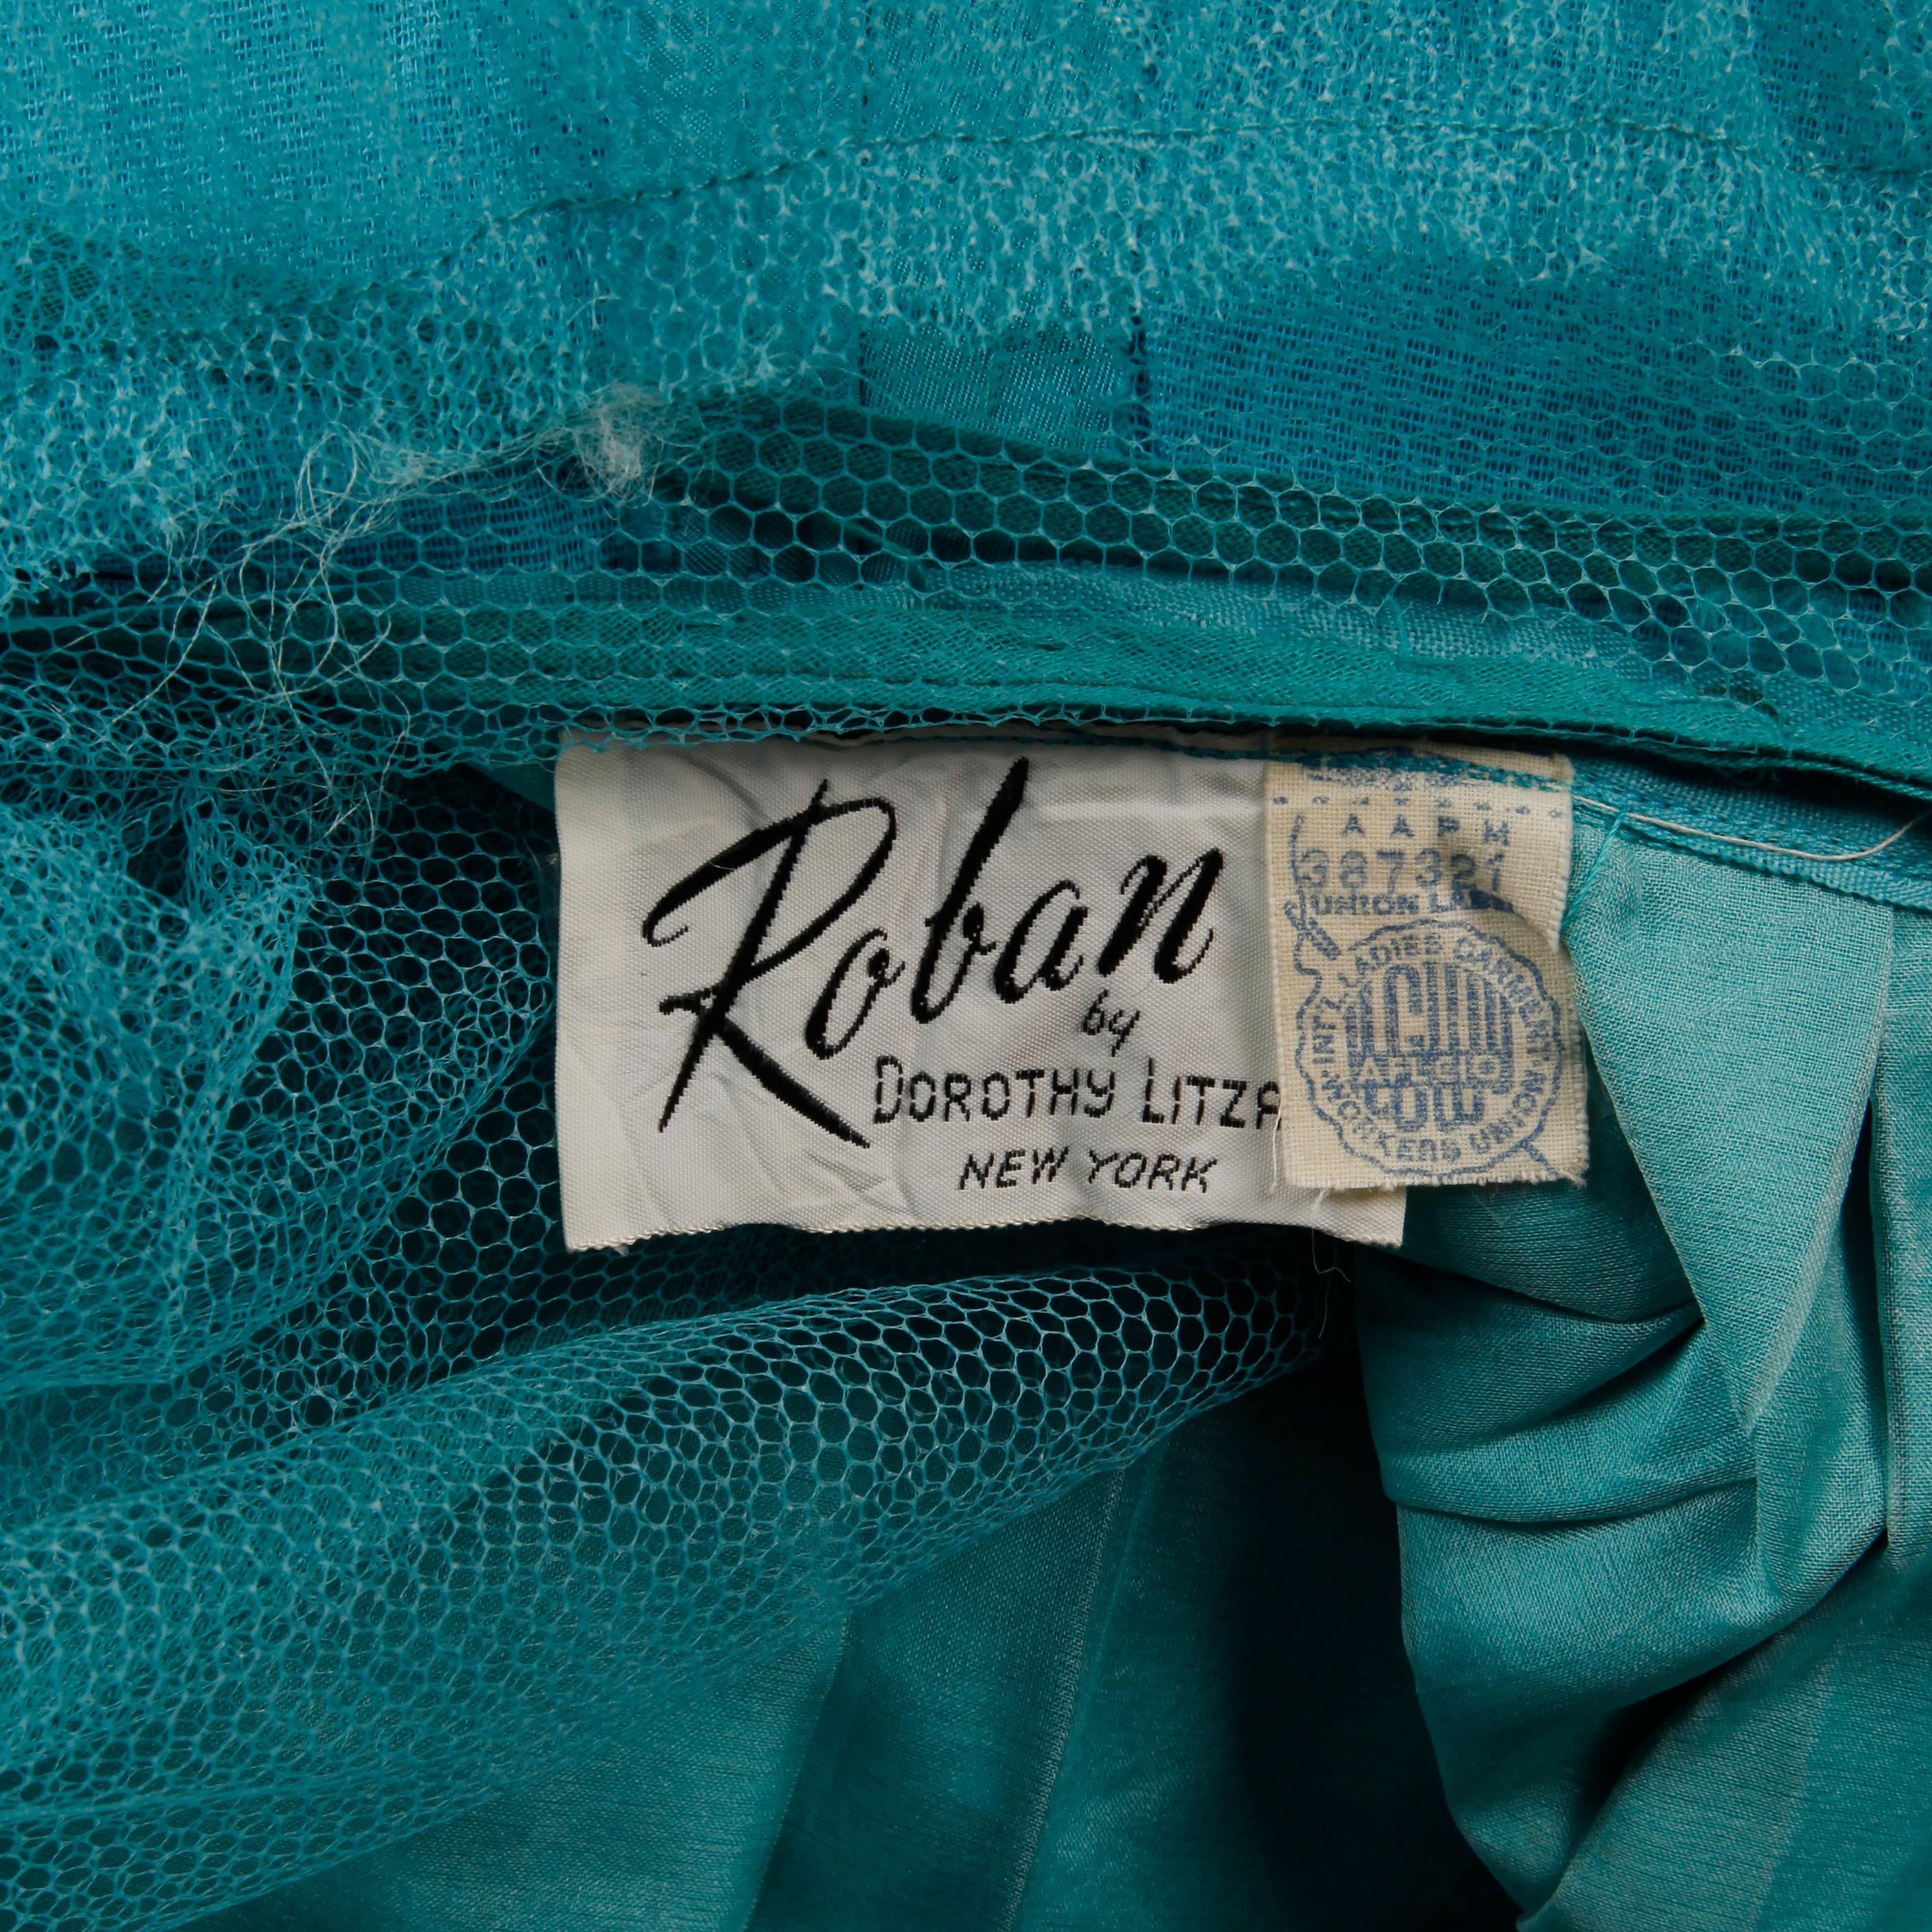 Stunning vintage robin's egg blue silk taffeta cocktail dress with a scoop neck, chantilly lace and tulip hem by Dorothy Litzan for Roban. Partially lined with rear metal zip and hook closure. Fits like a modern size XS. The bust measures 36